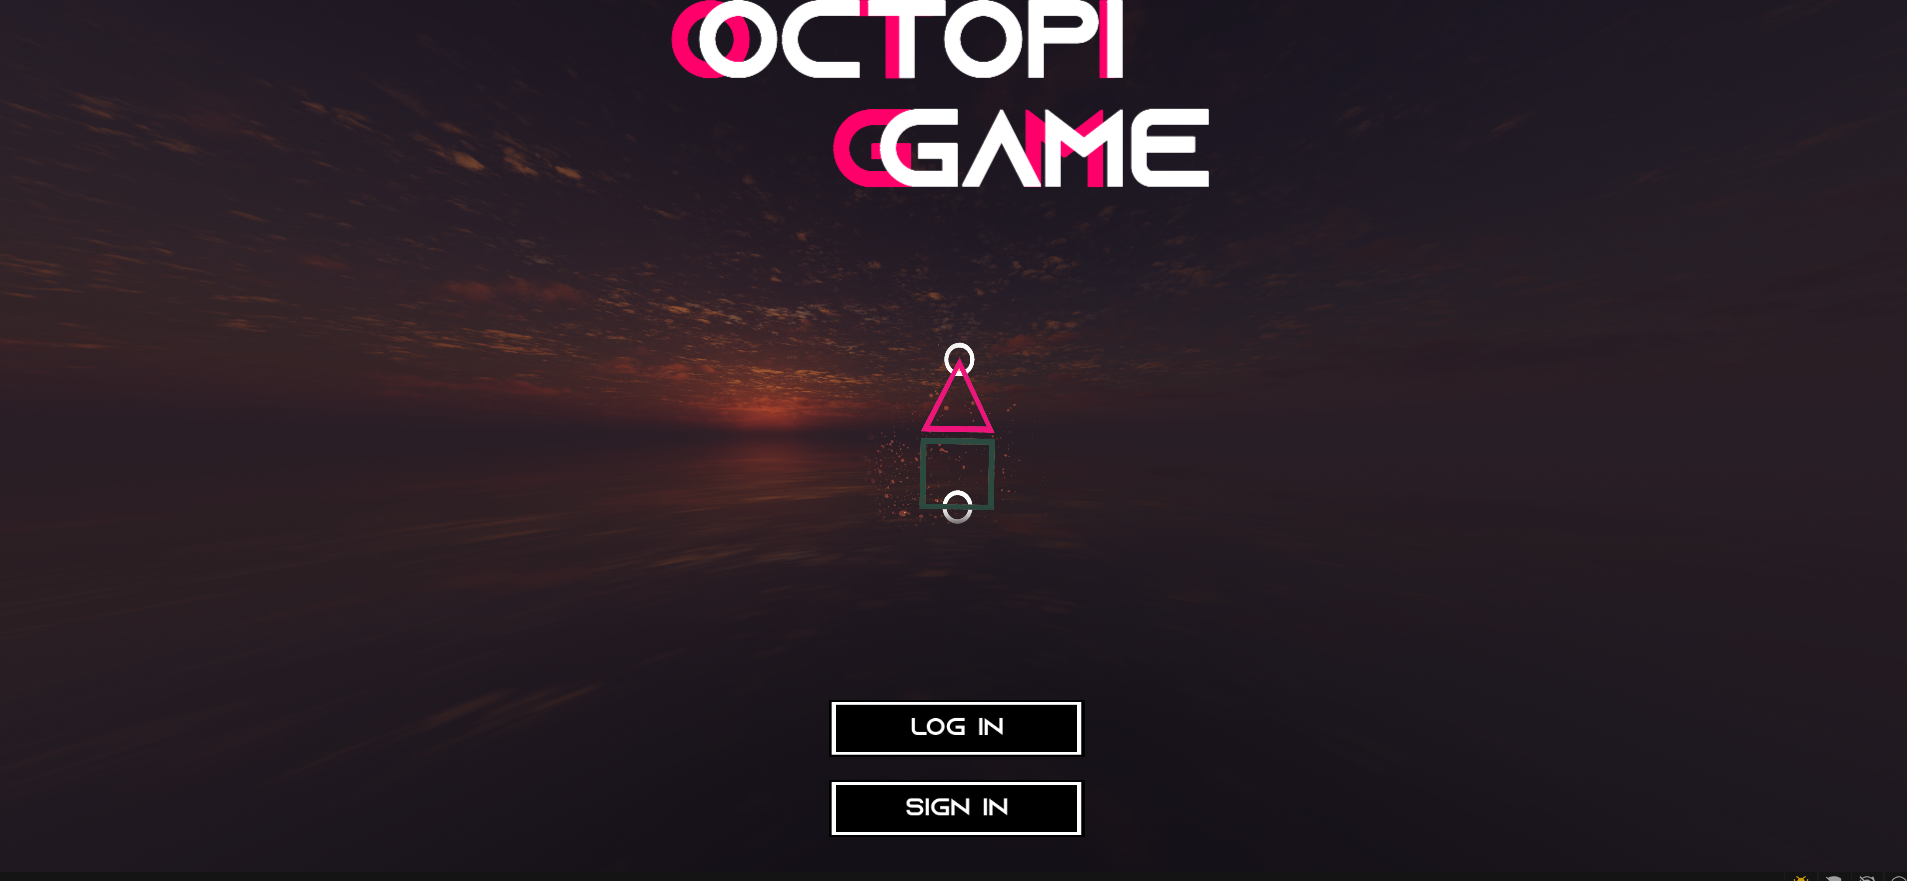 Octopi Game [ Online Multiplayer ] by Poly Adventure - ReckDev